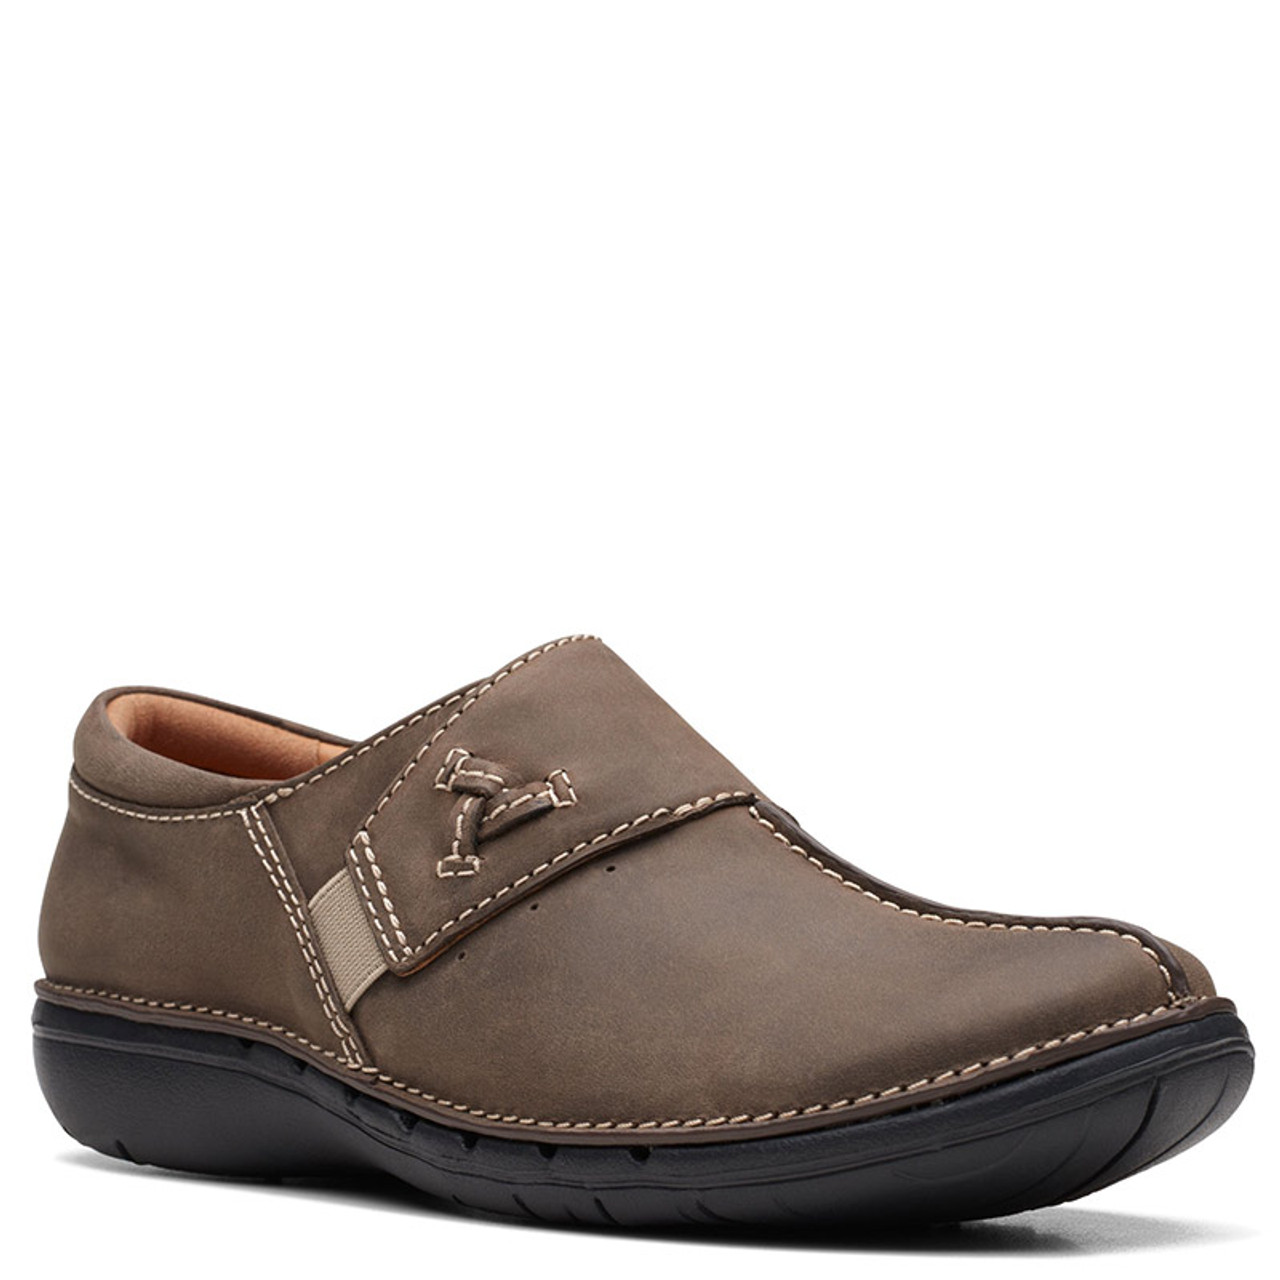 Clarks 26168671 UN LOOP AVE Taupe Brown Shoes - Family Footwear Center